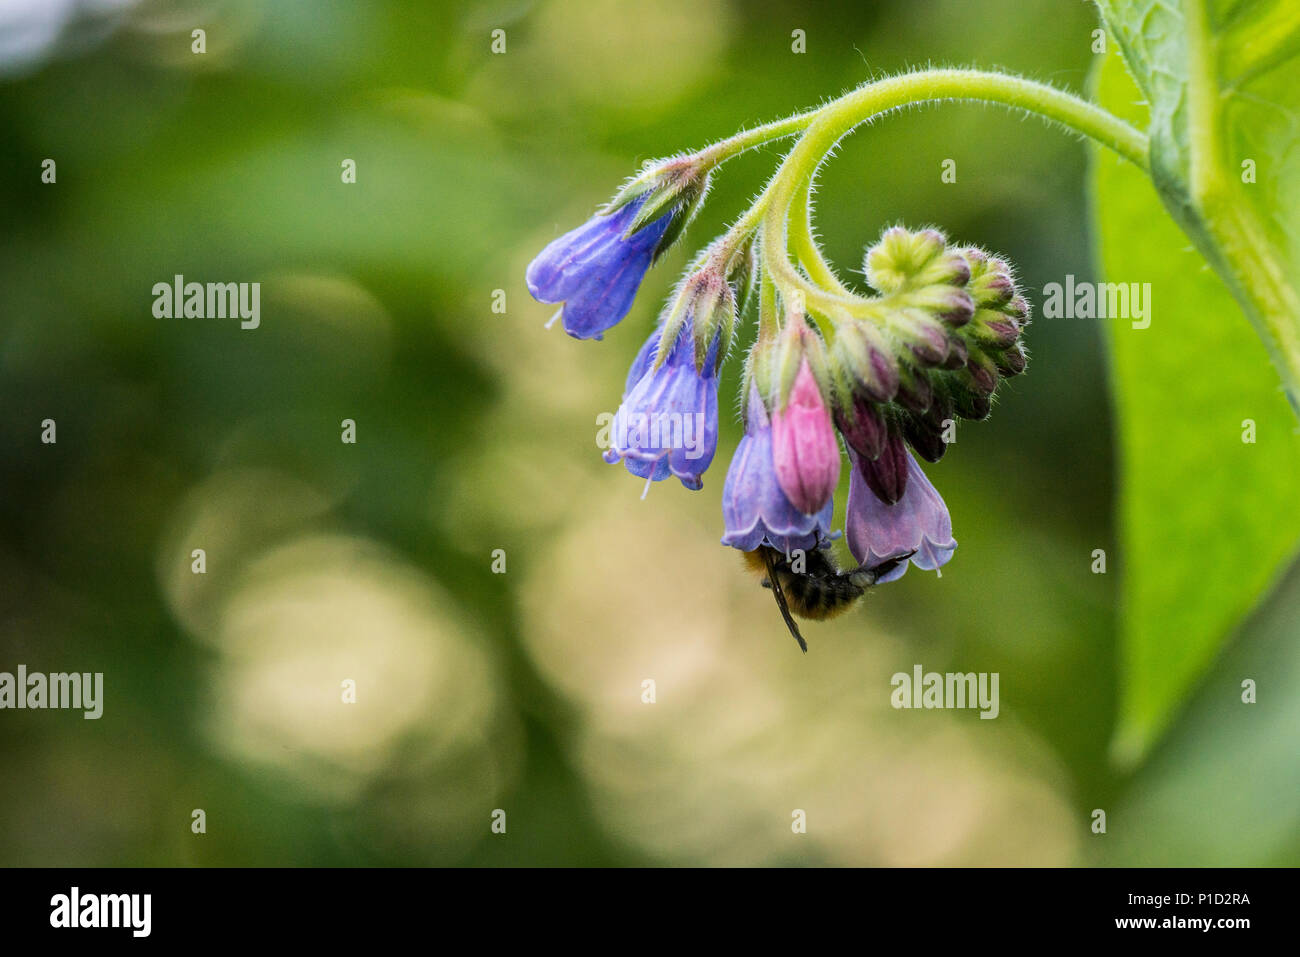 A bee on the flower of a comfrey plant Stock Photo